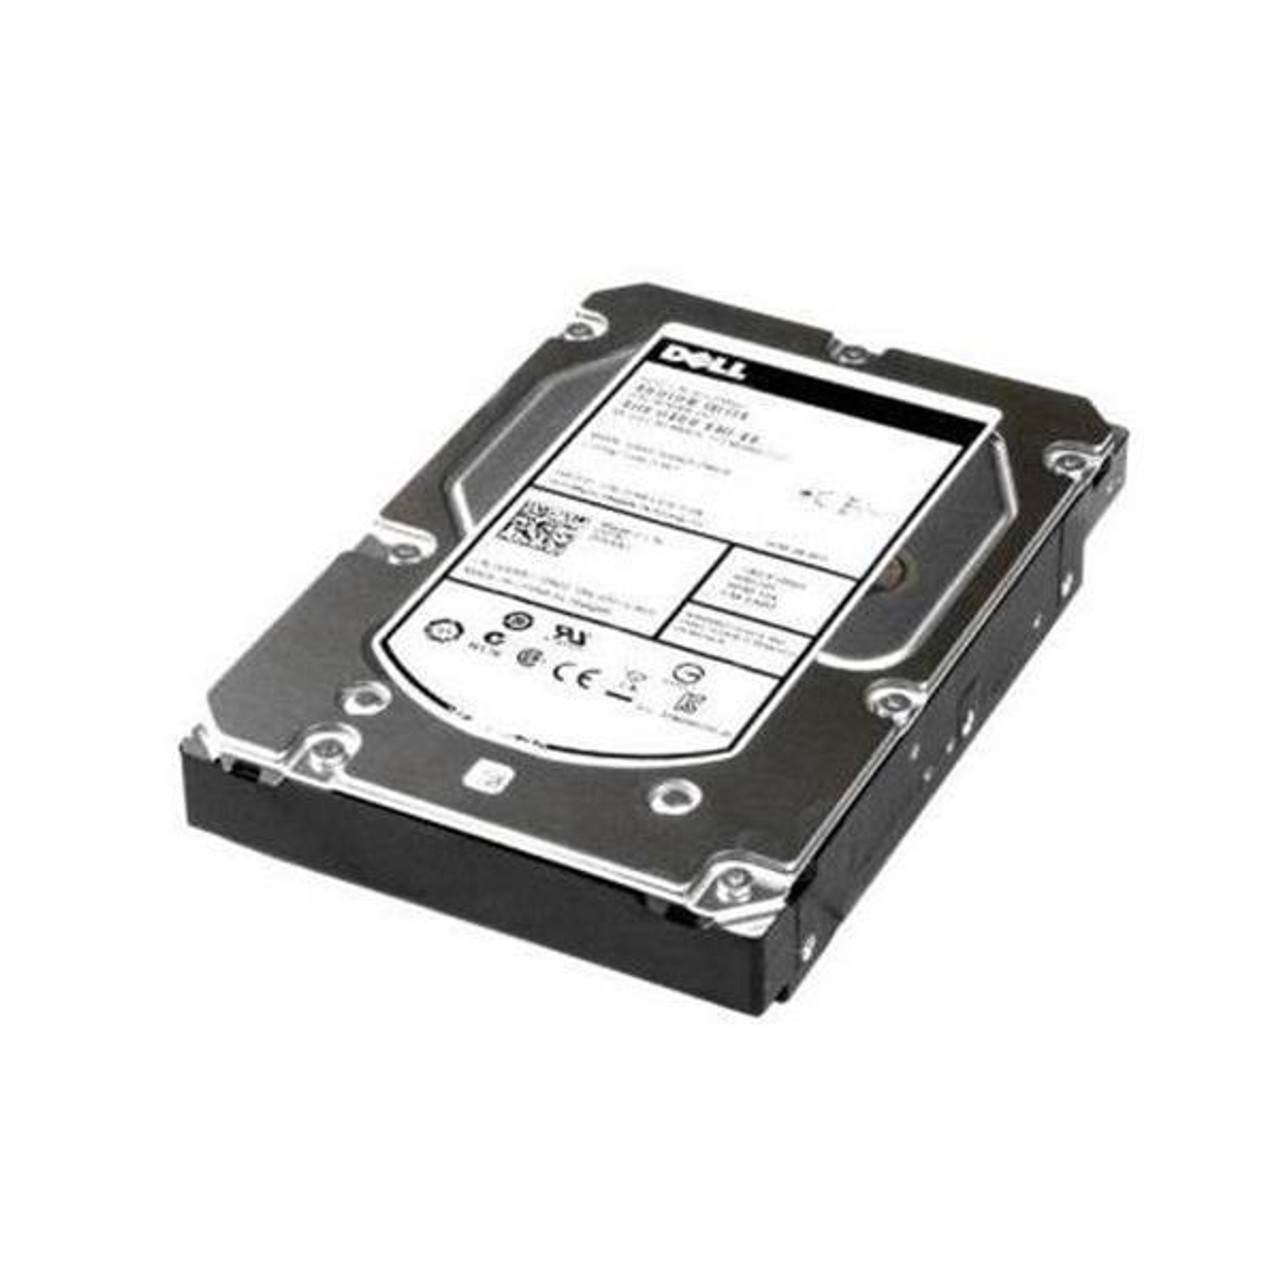 Dell 4TB 7200RPM SAS 6Gbps Nearline 3.5-inch Internal Hard Drive with Tray